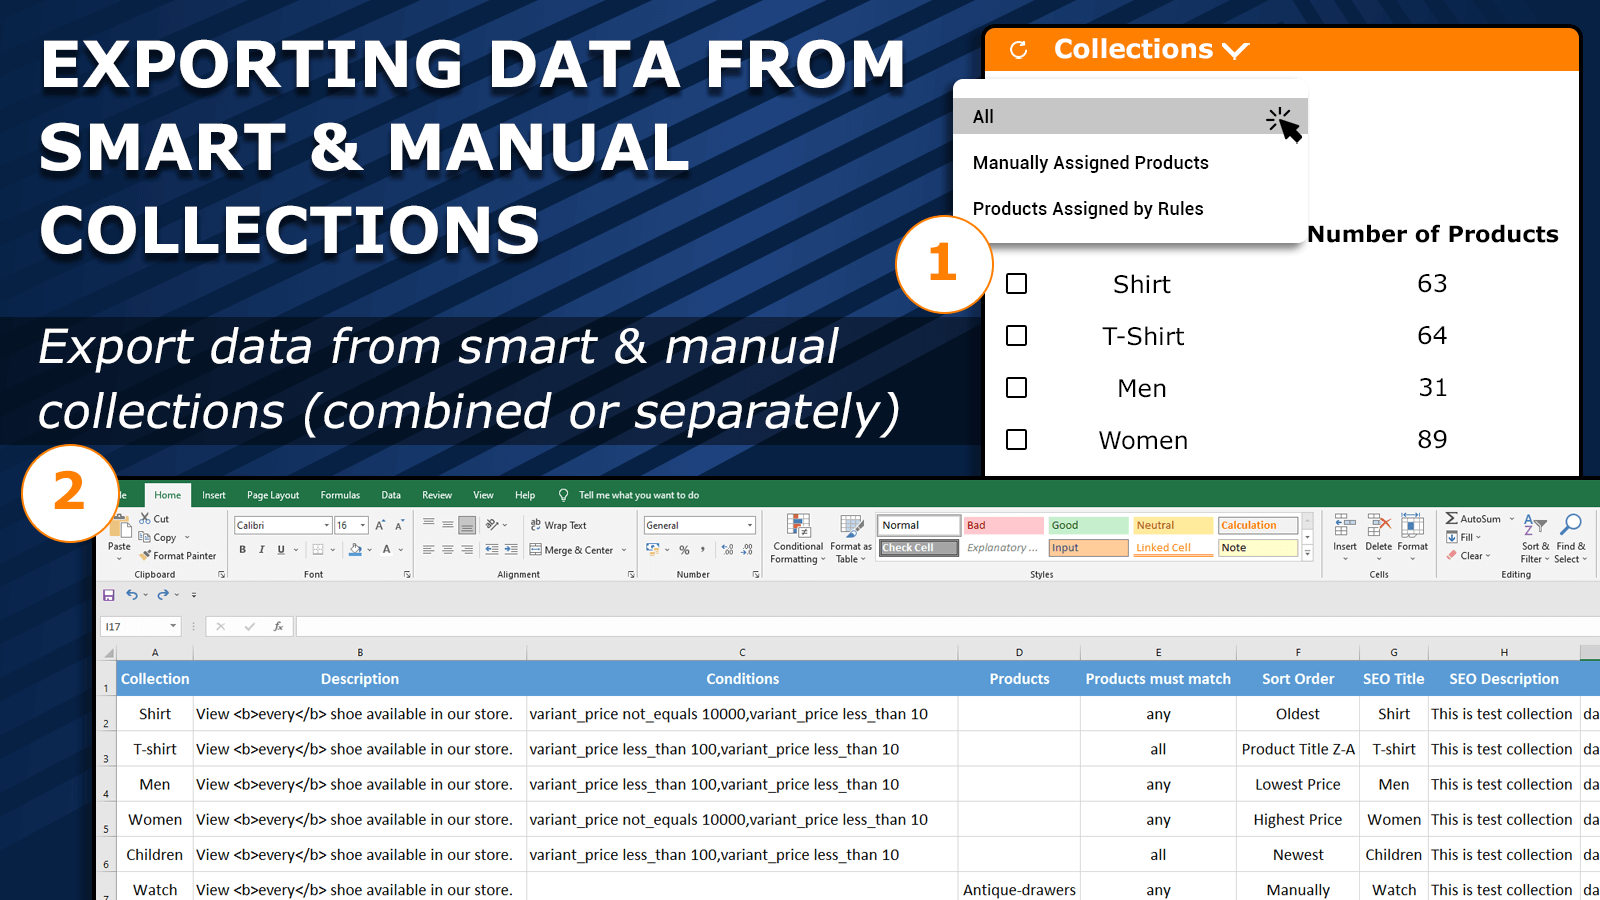 Exporting data from smart & manual collections